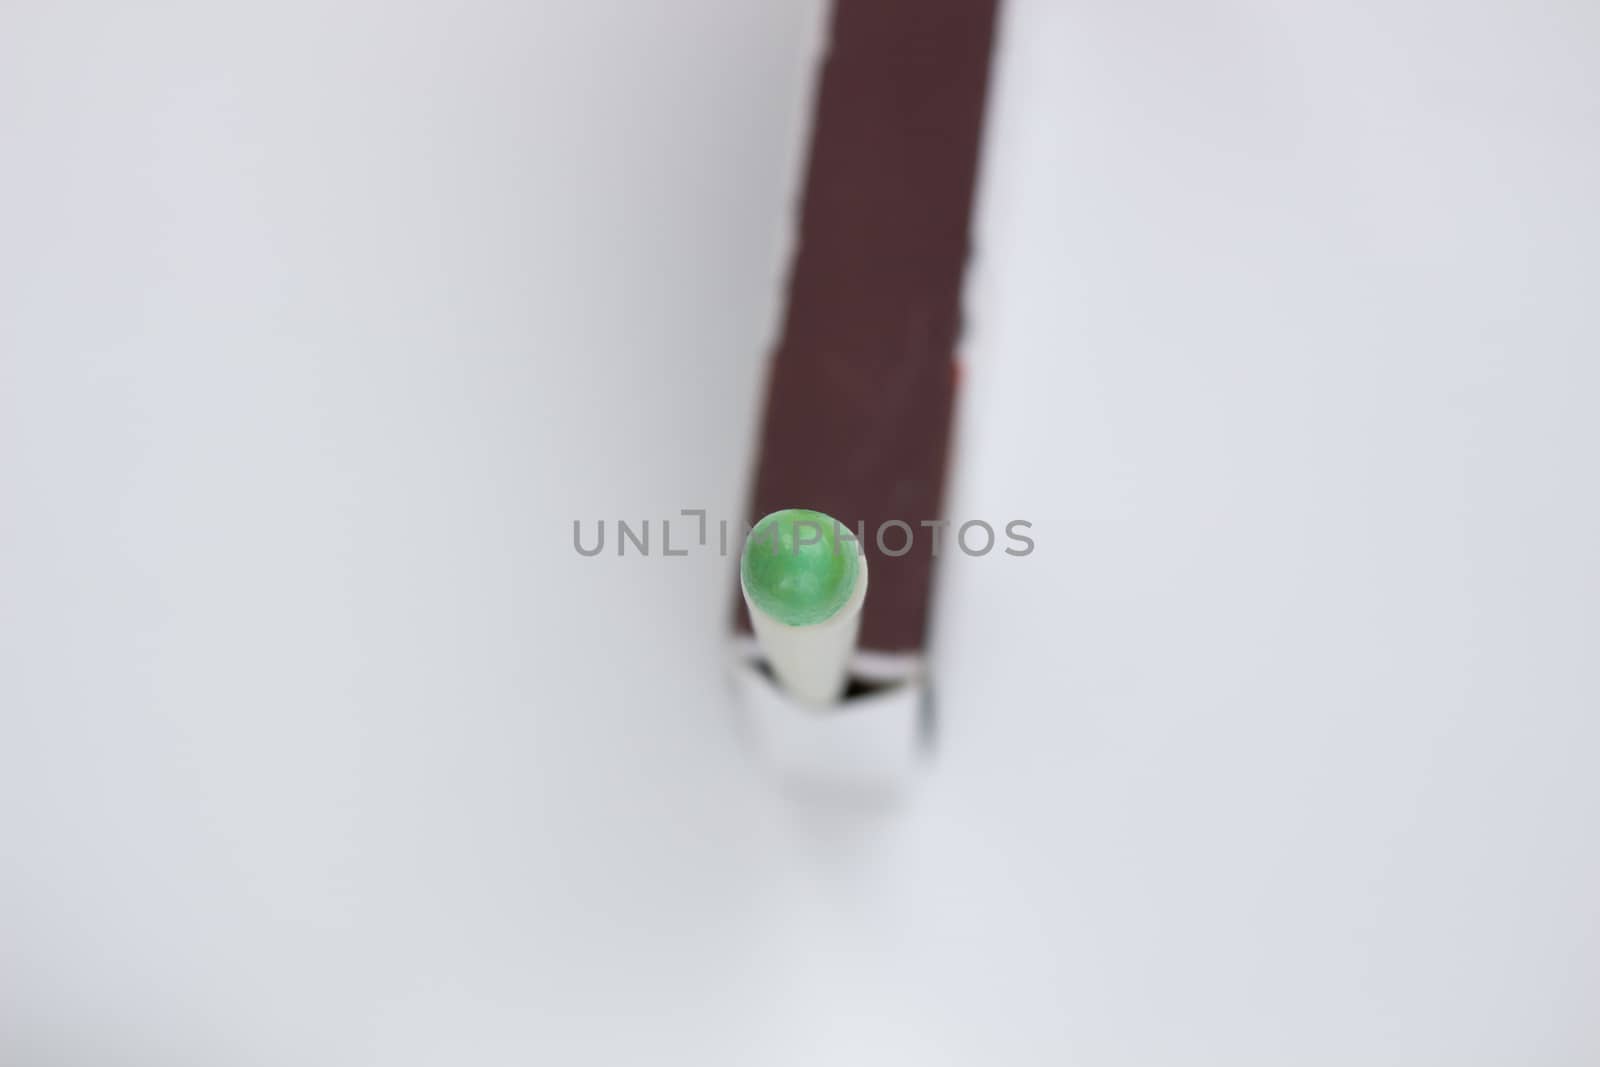 Hunting waterproof matches in a paper box isolated on white background.